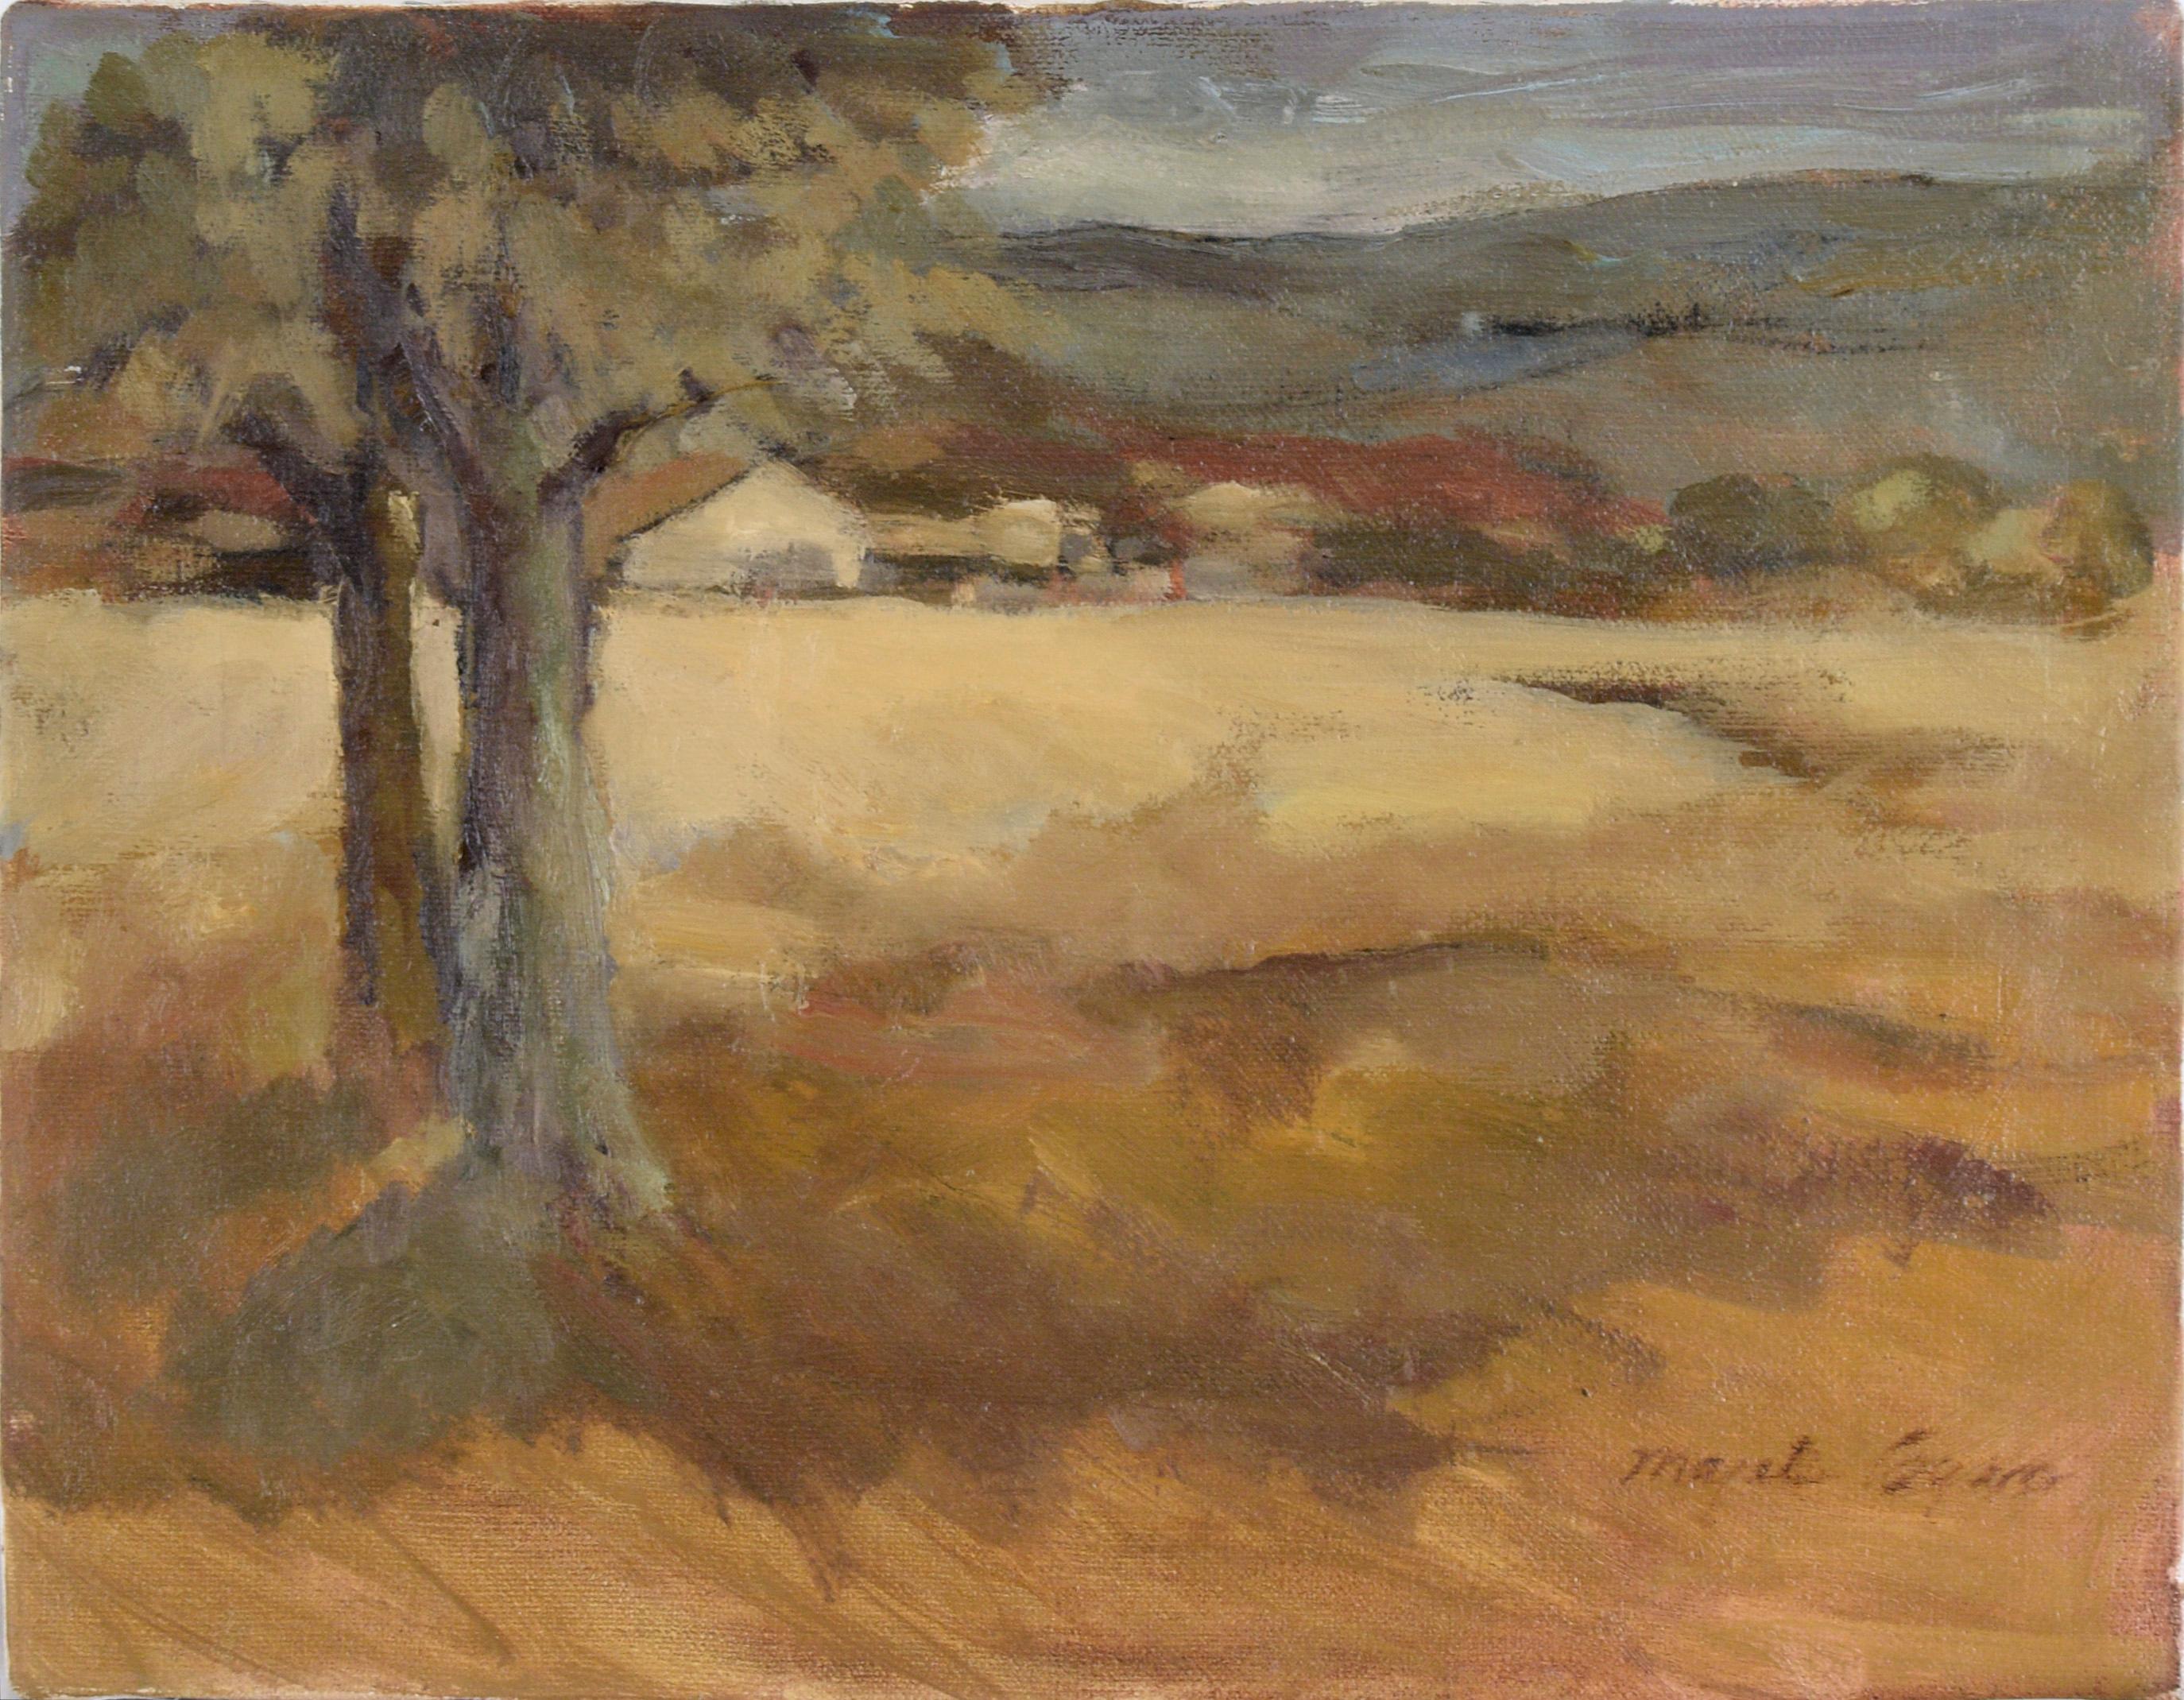 Majel Logan Landscape Painting - Northern California Golden Valley - Farm Landscape in Oil on Canvas